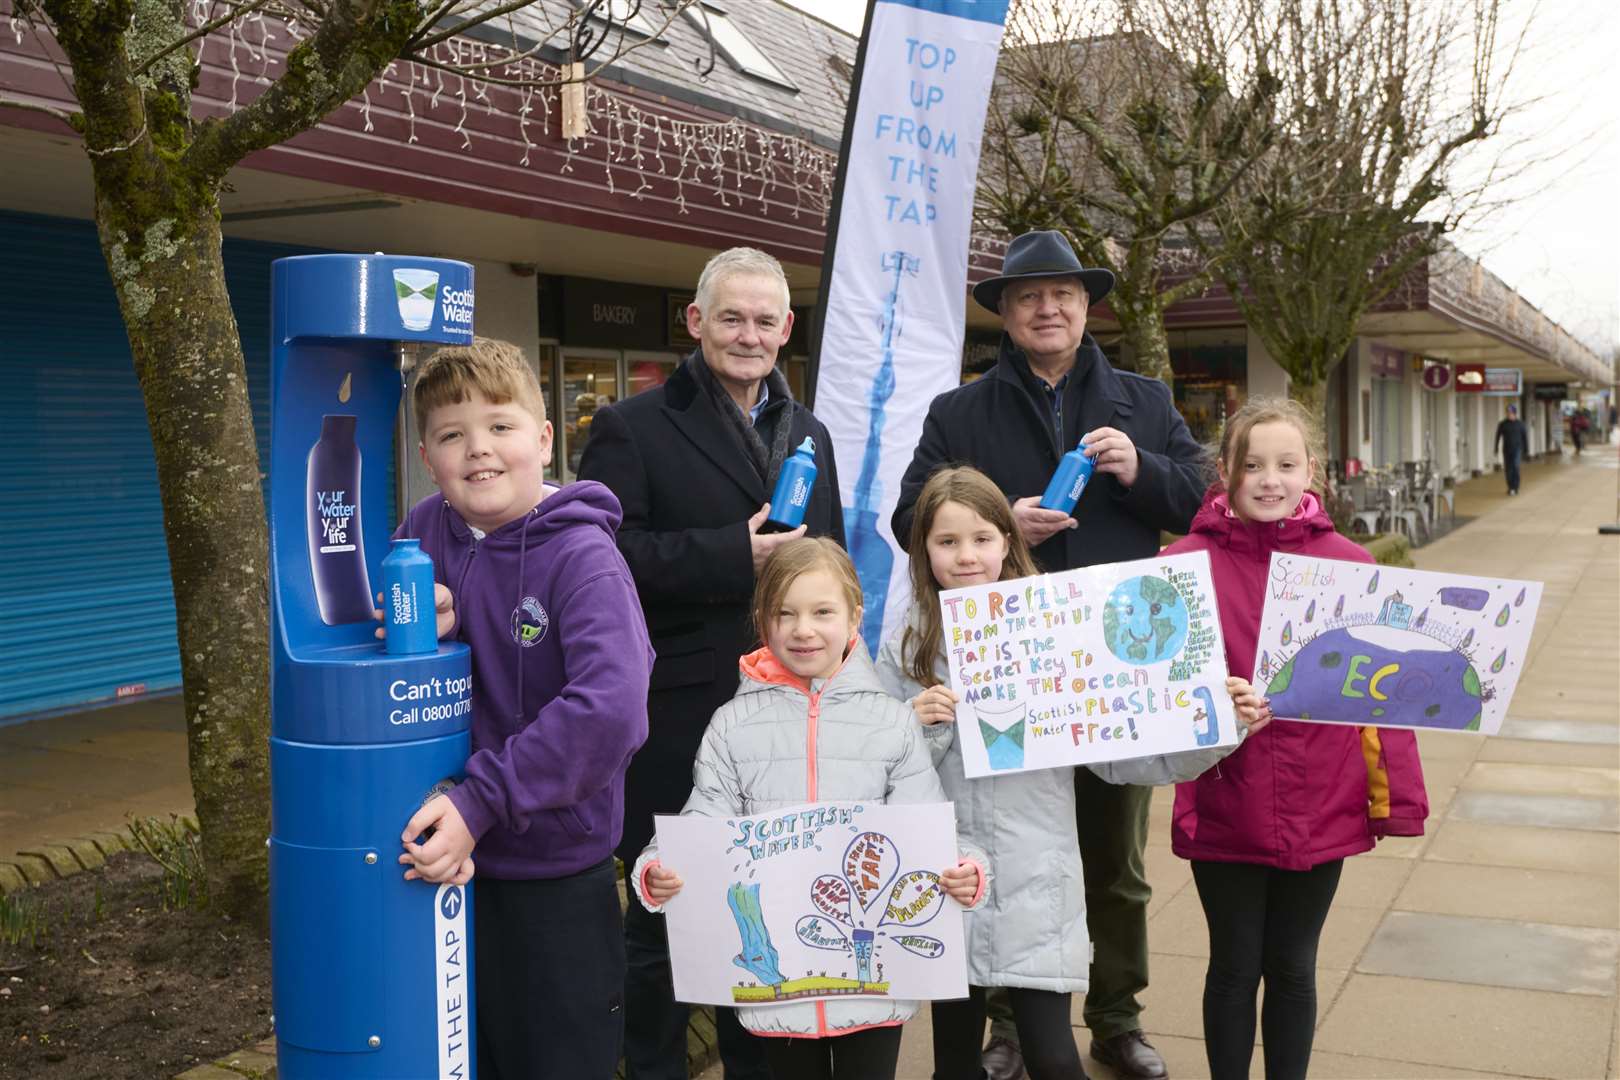 Scottish Water Chief Operating Officer Peter Farrer and Councillor Bill Lobban. Front from left, Aviemore Primary Pupils Alfie Kirby, Hanna Drozd, Solveig Dennis and Emelia Owen.